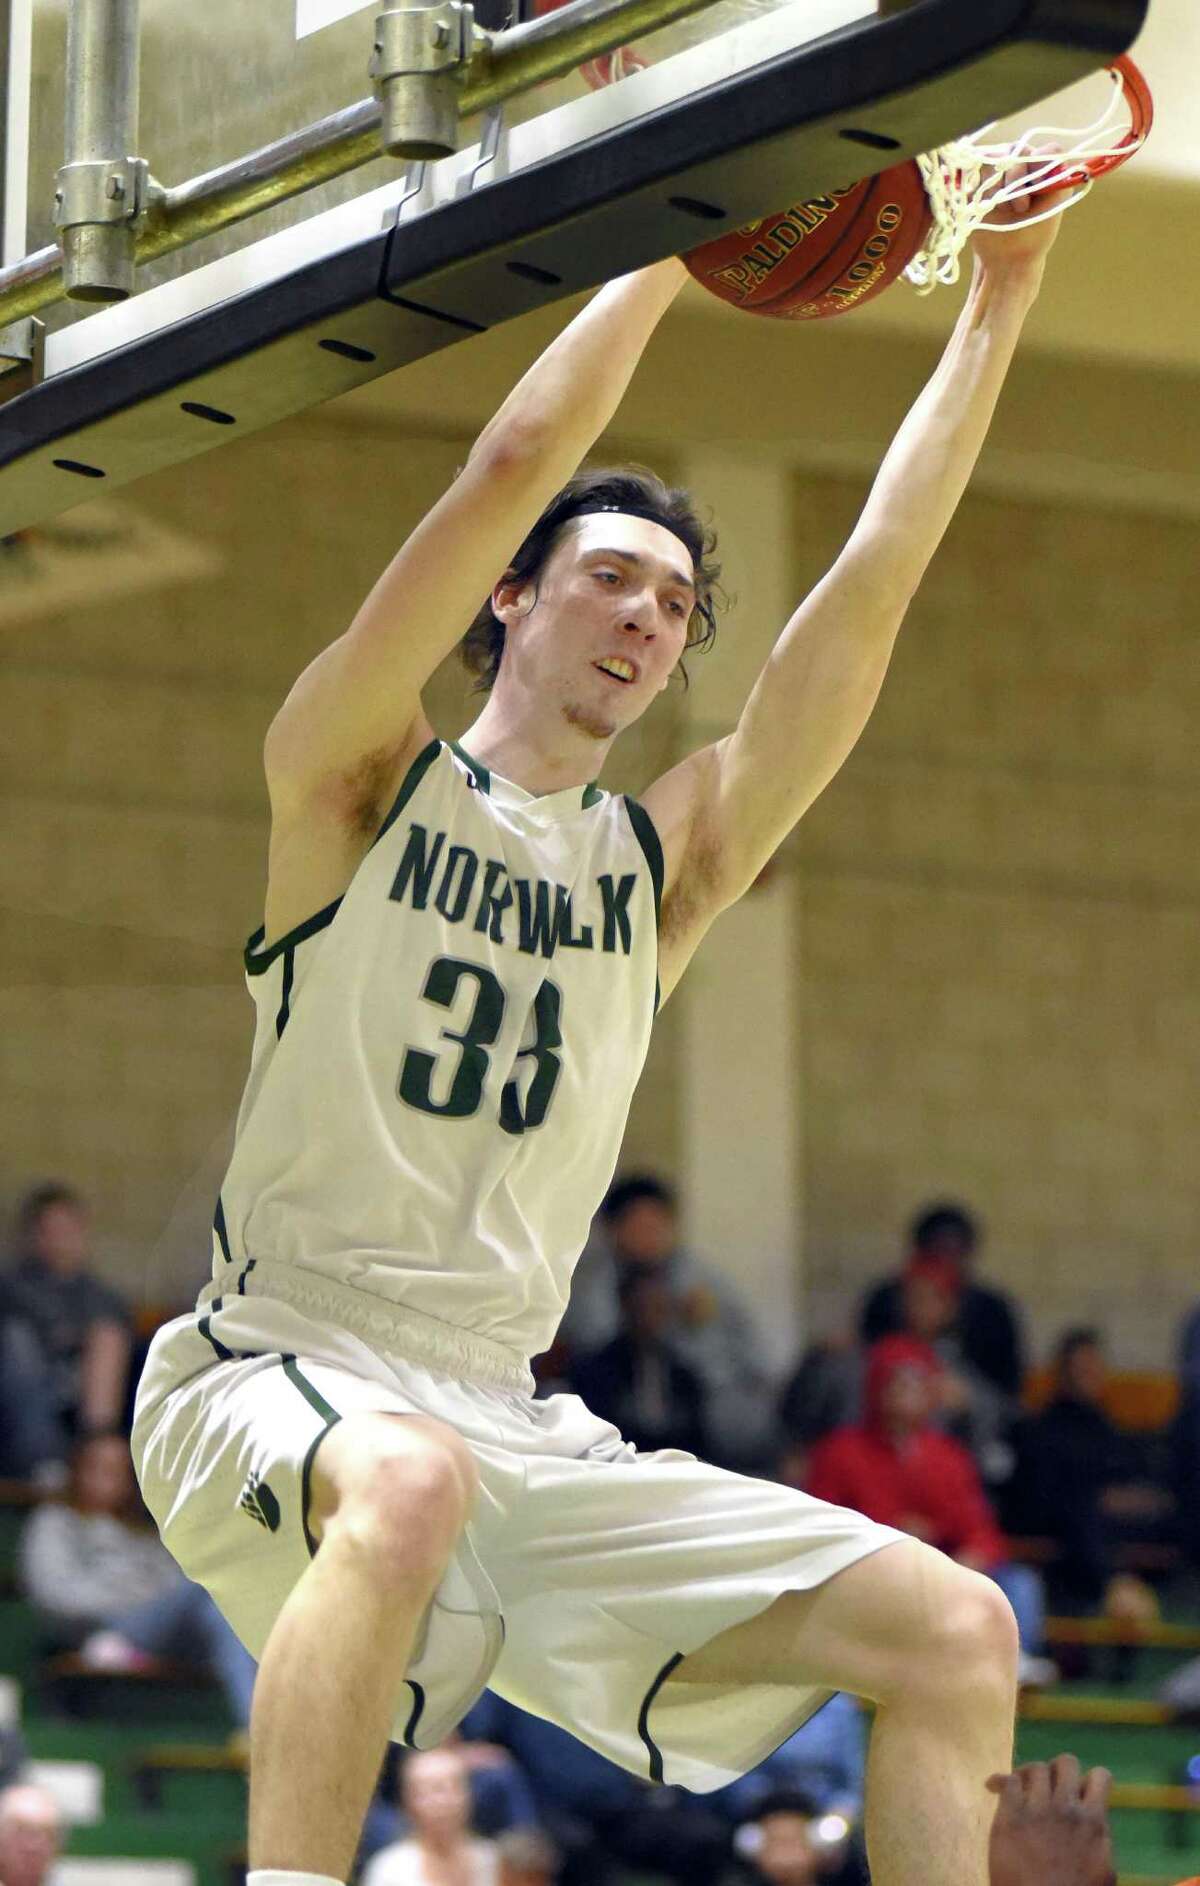 Norwalk’s Peter Kotulsky dunks the ball during the second half of Tuesday’s game.